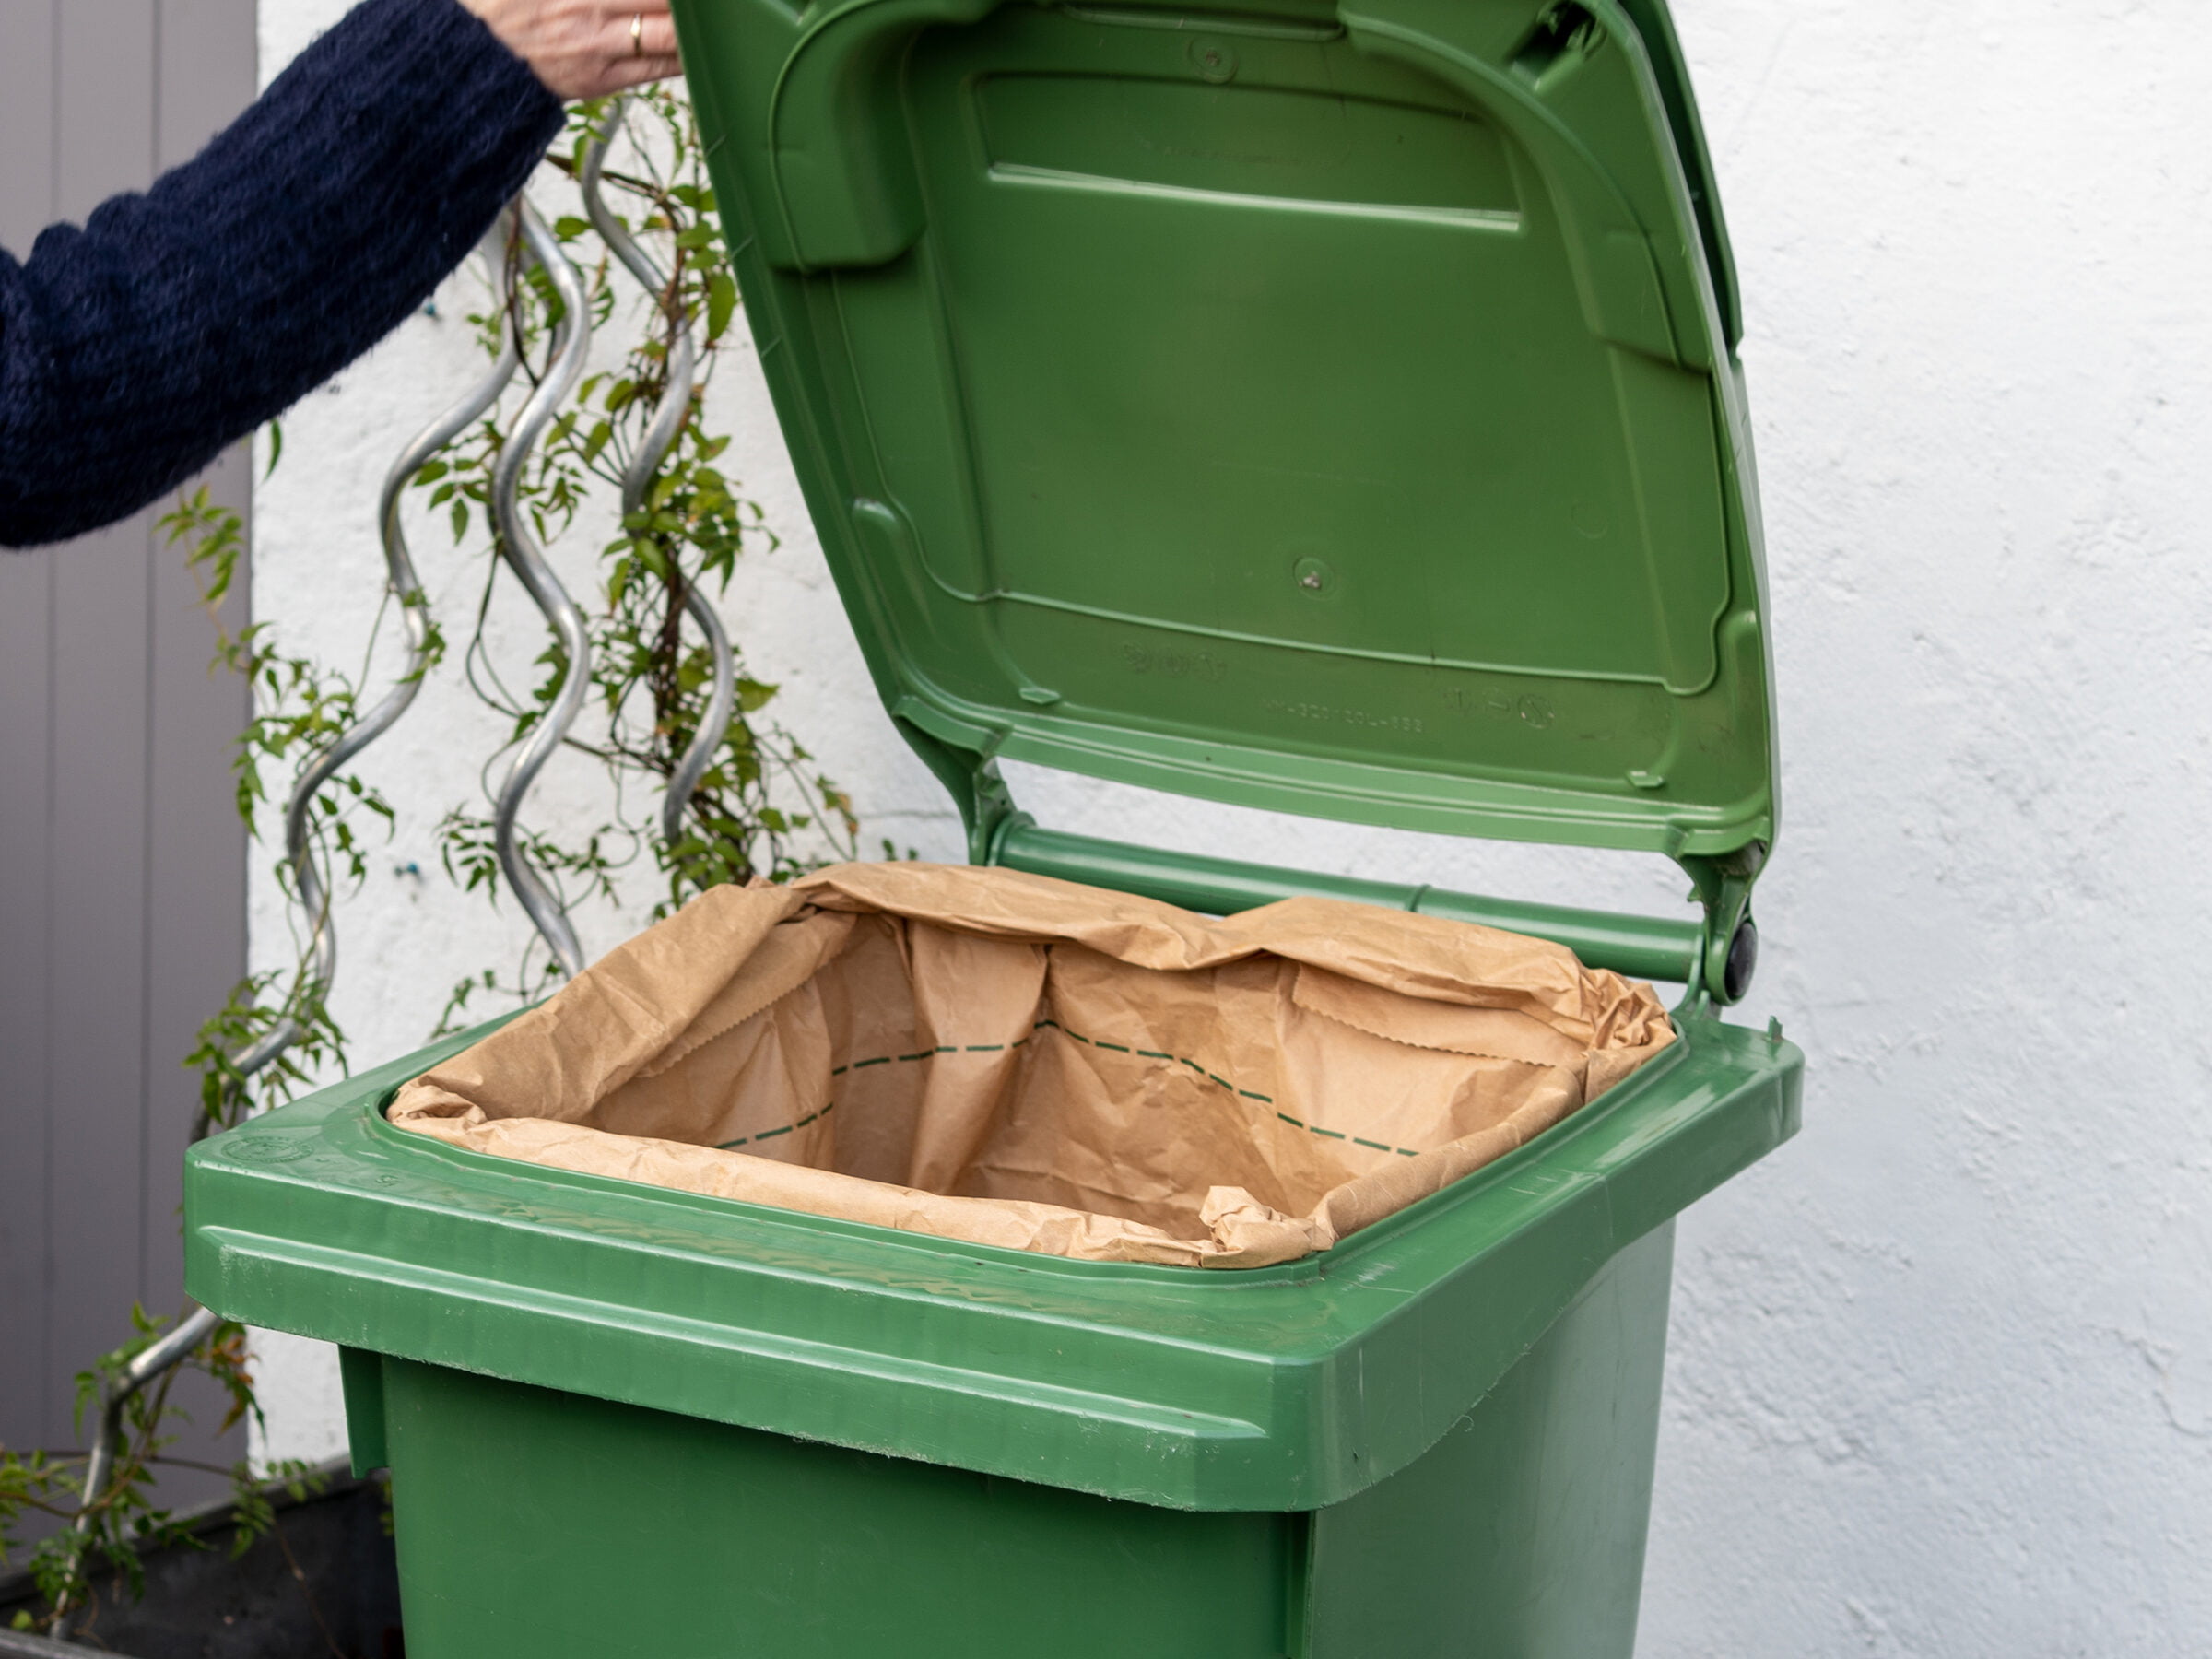 Why should we use compostable bin liners? — Ecobagsnz